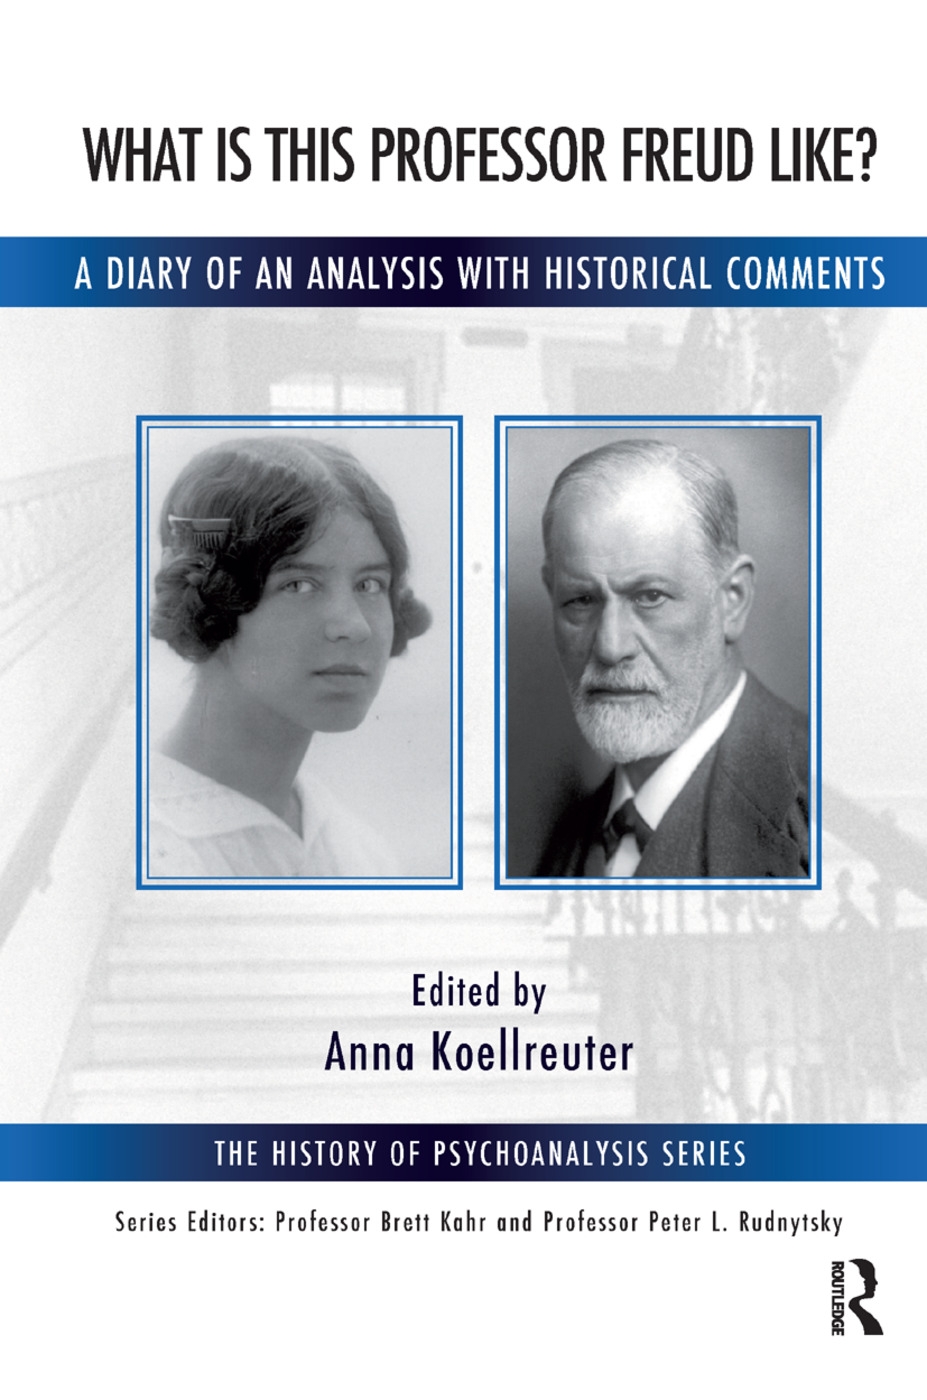 What Is This Professor Freud Like?: A Diary of an Analysis With Historical Comments